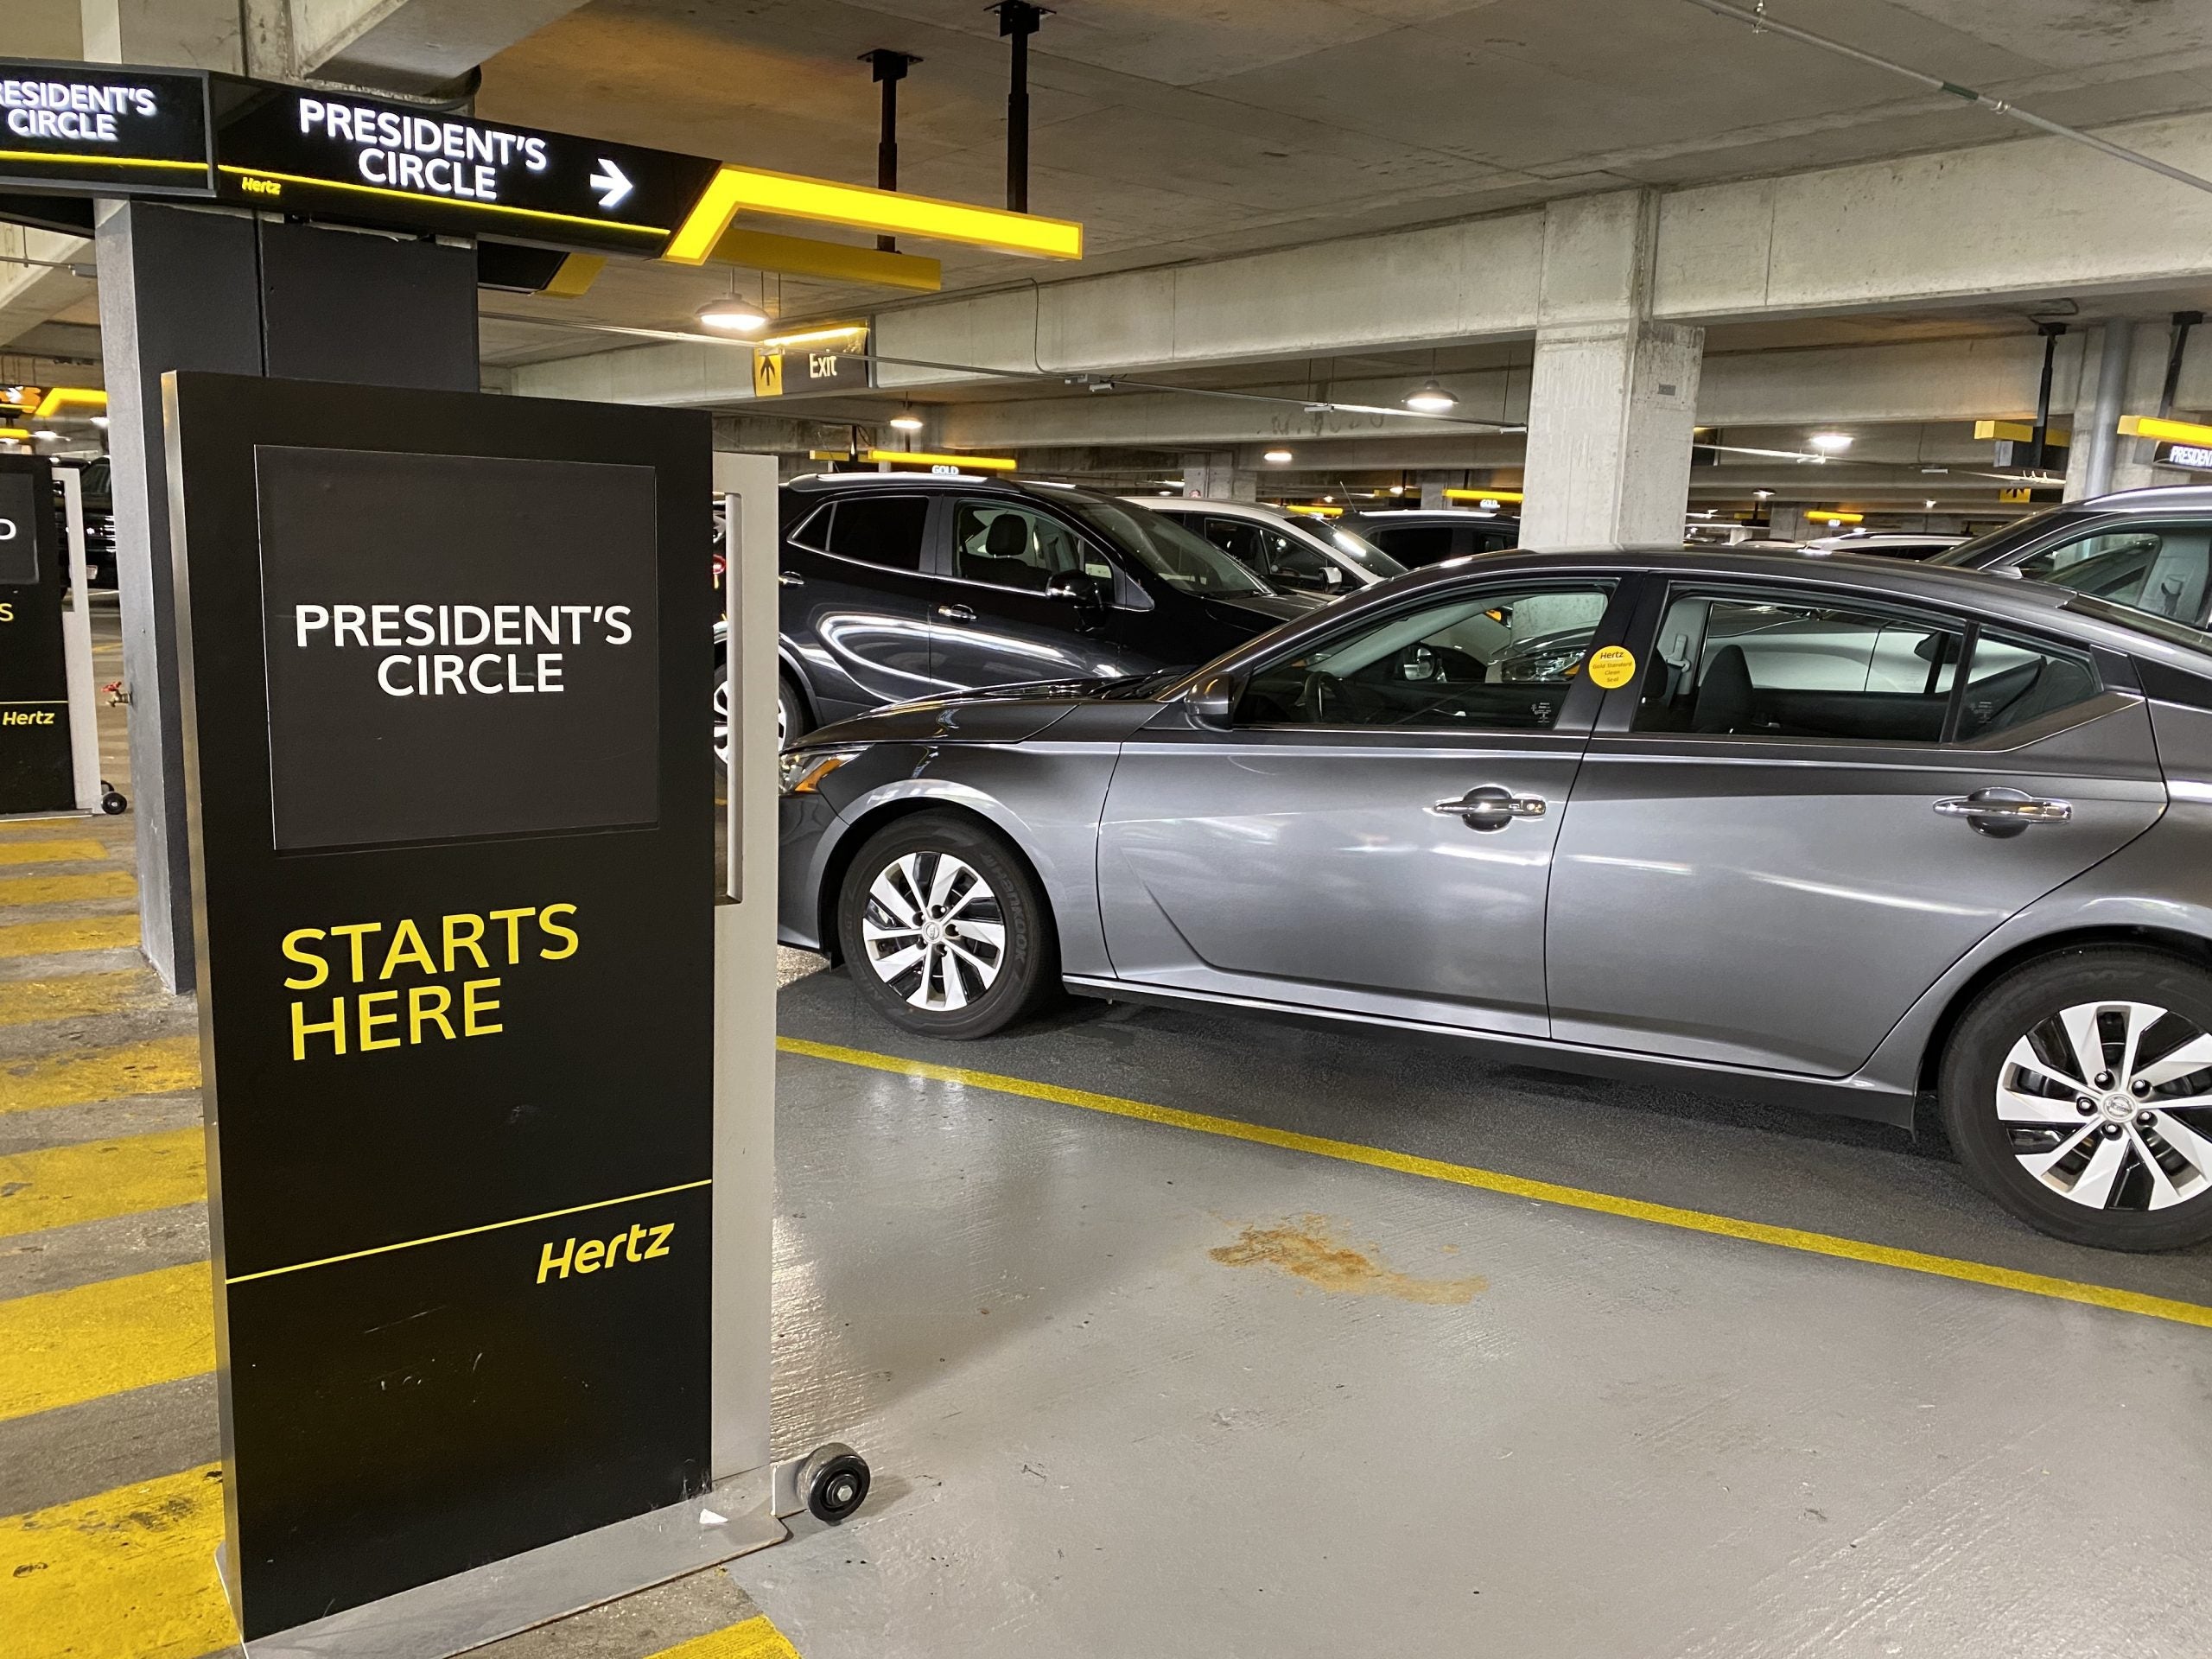 Photo of a sign saying 'president's circle starts here' in a Hertz car rental lot